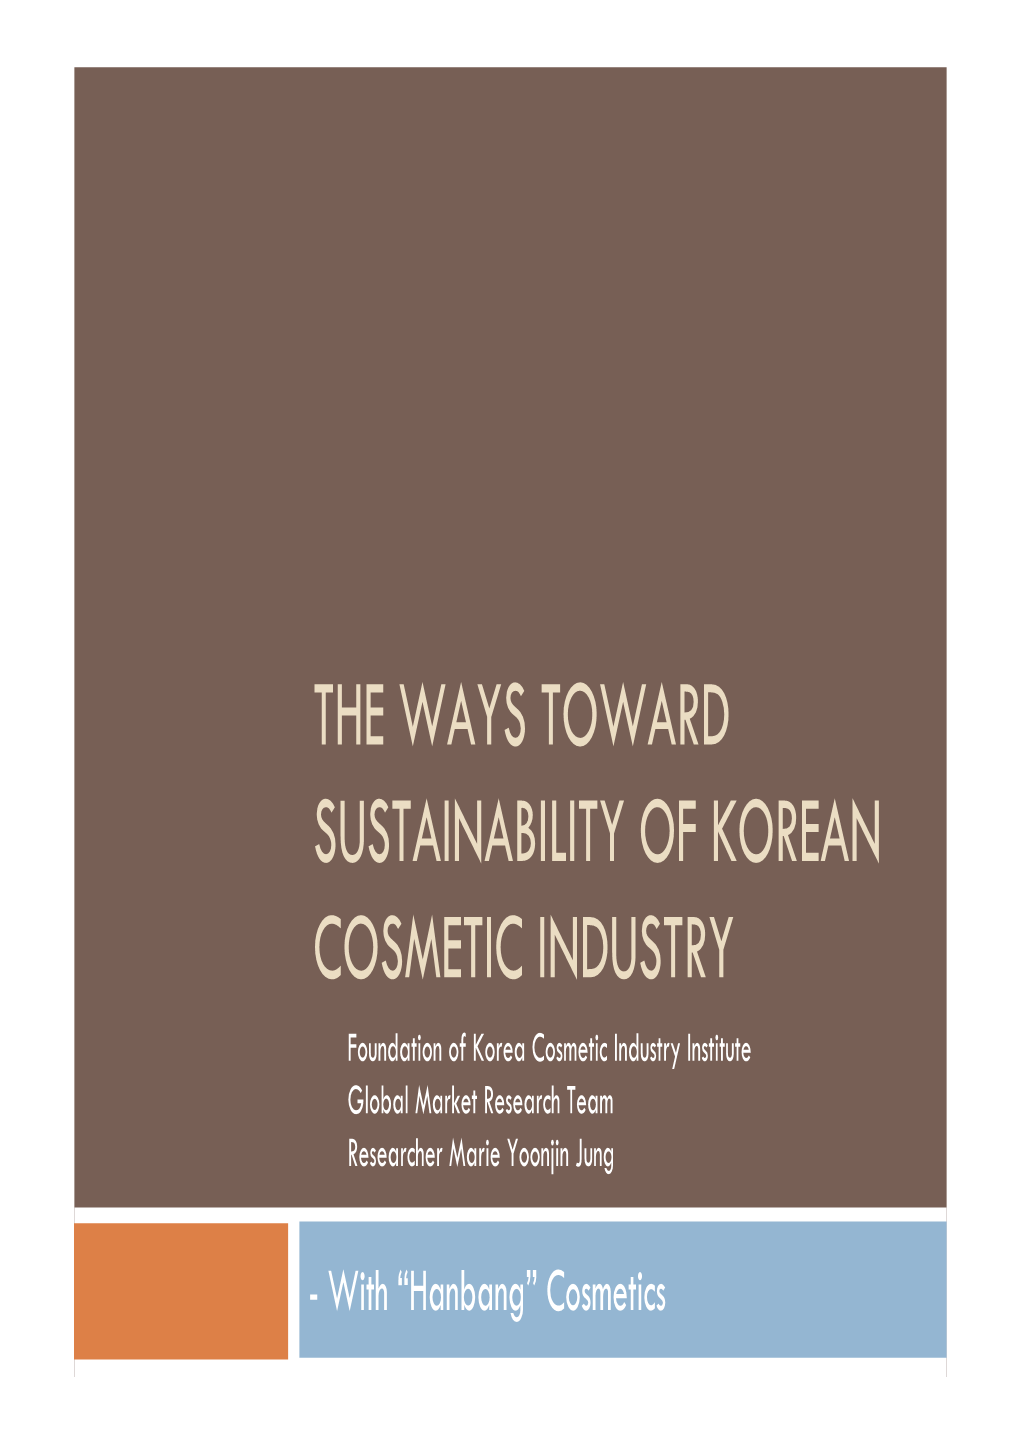 THE WAYS TOWARD SUSTAINABILITY of KOREAN COSMETIC INDUSTRY Foundation of Korea Cosmetic Industry Institute Global Market Research Team Researcher Marie Yoonjin Jung